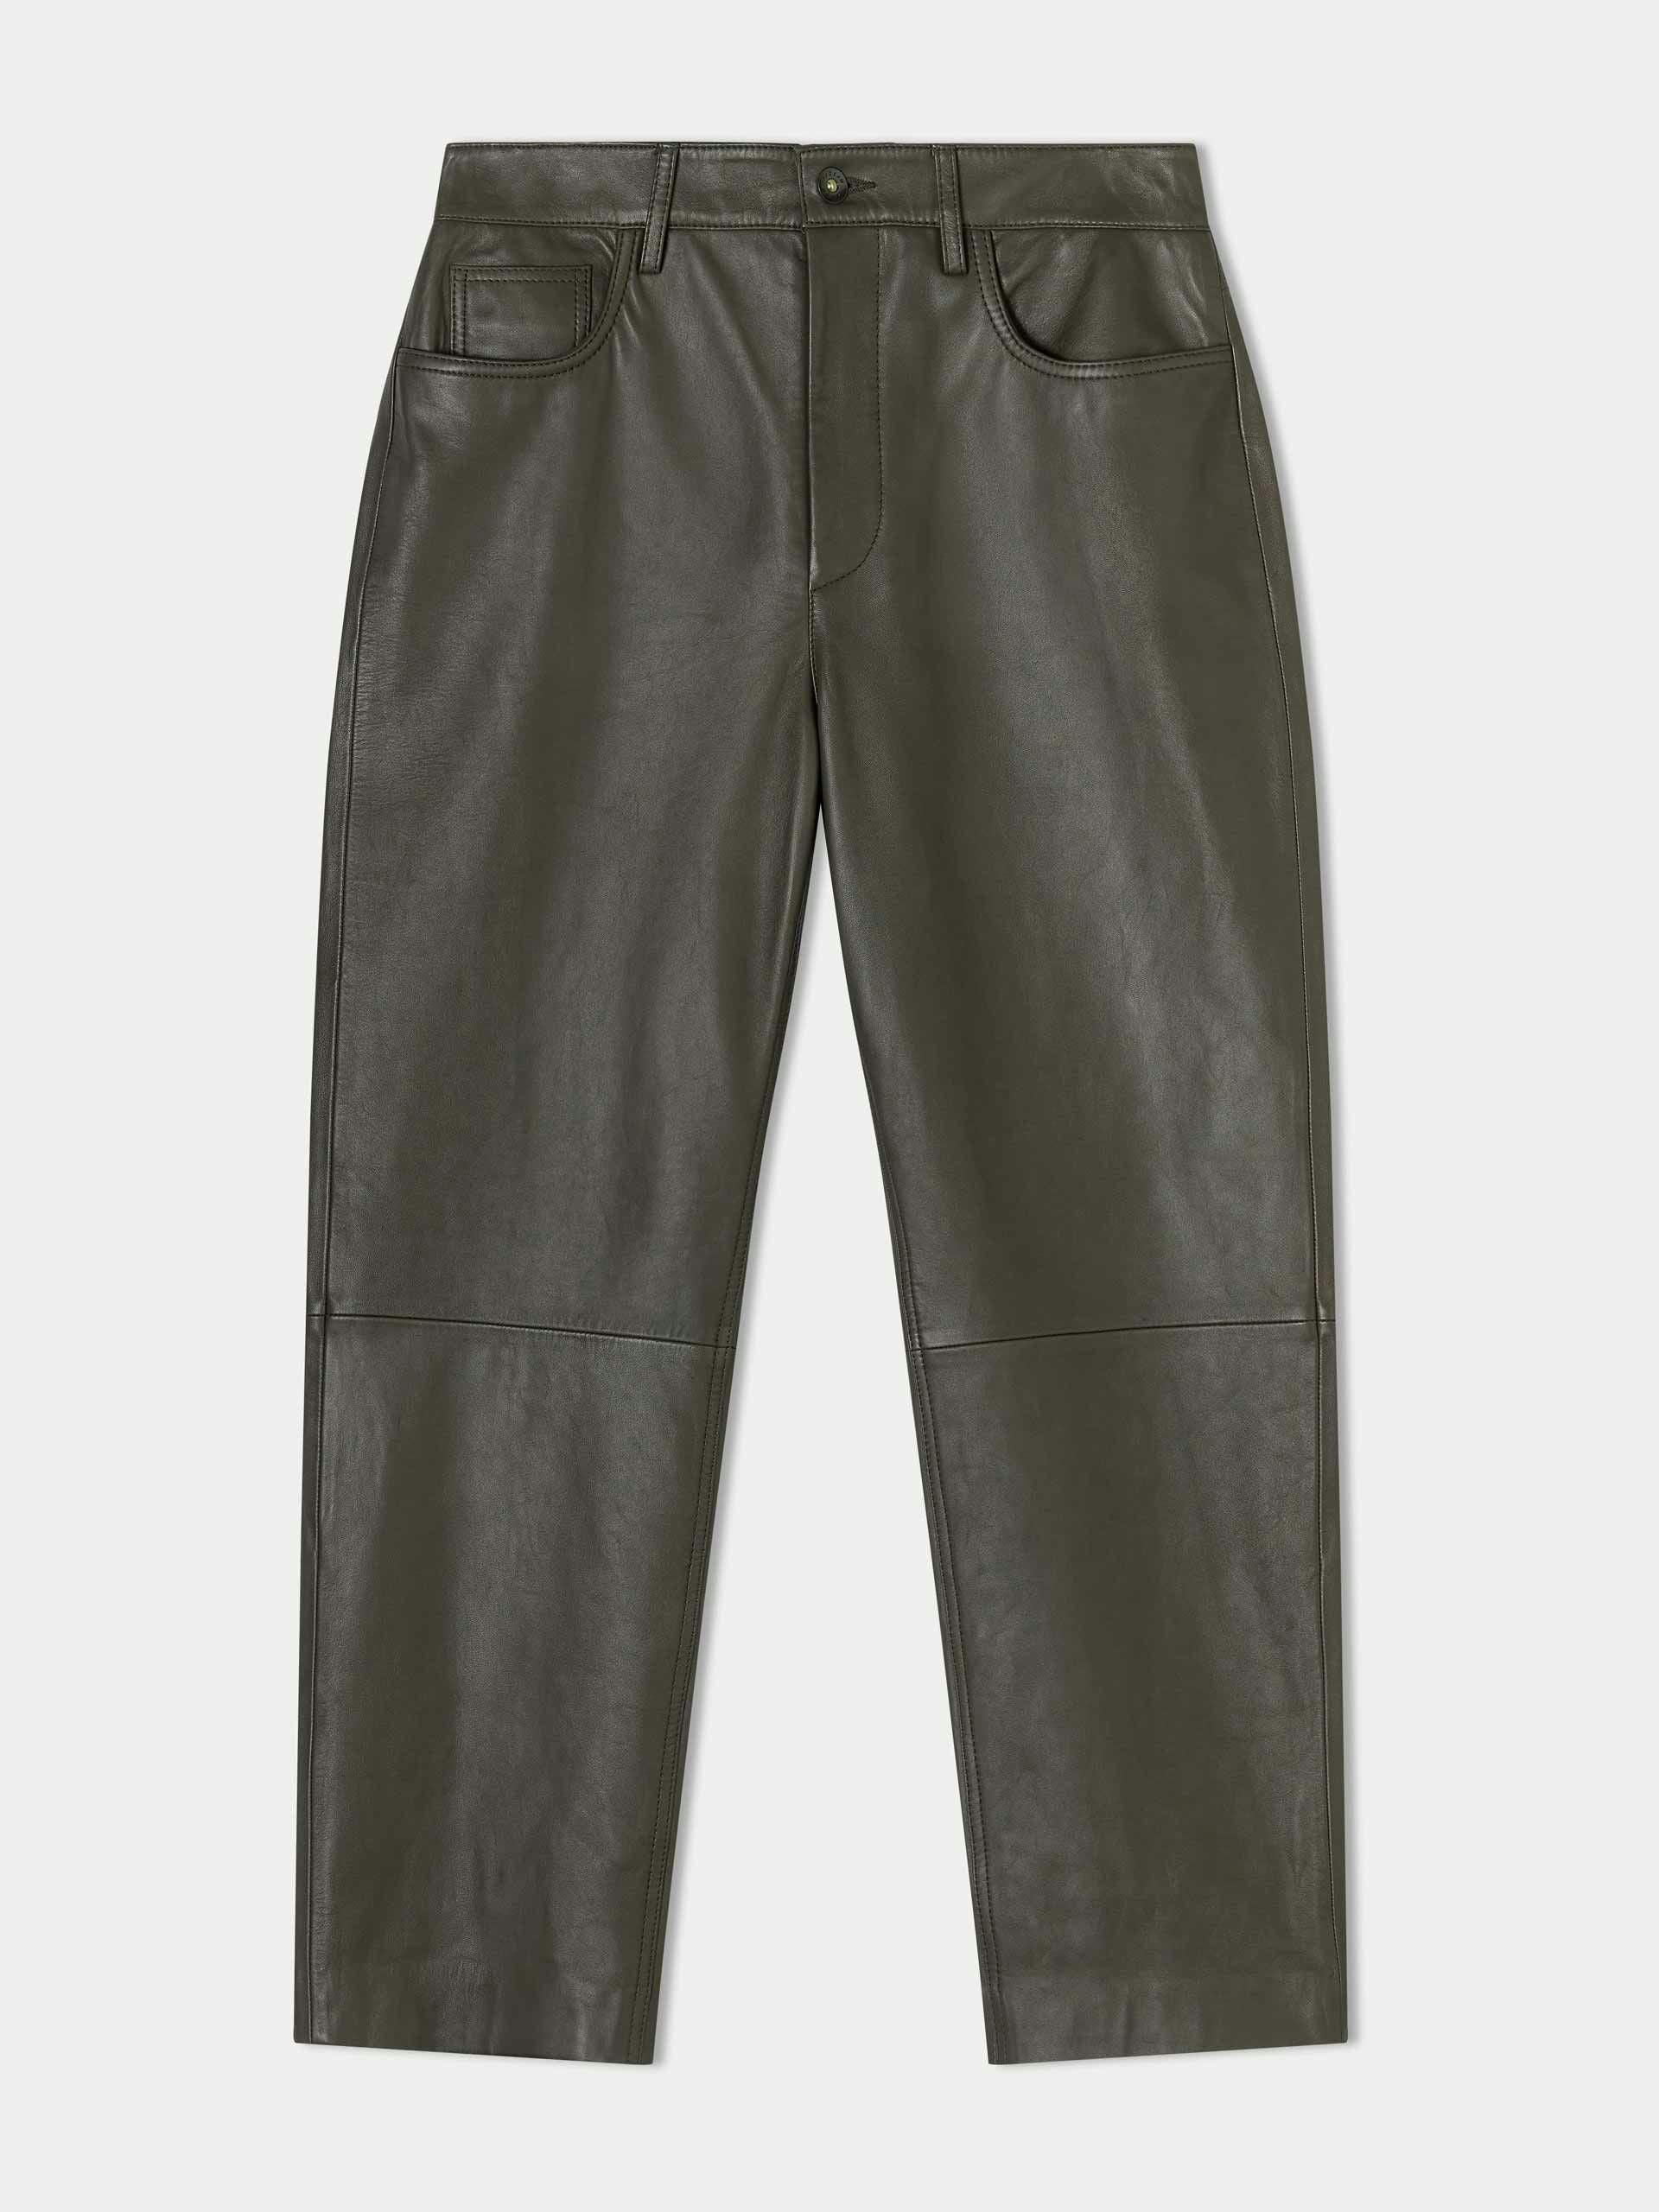 Leather trouser